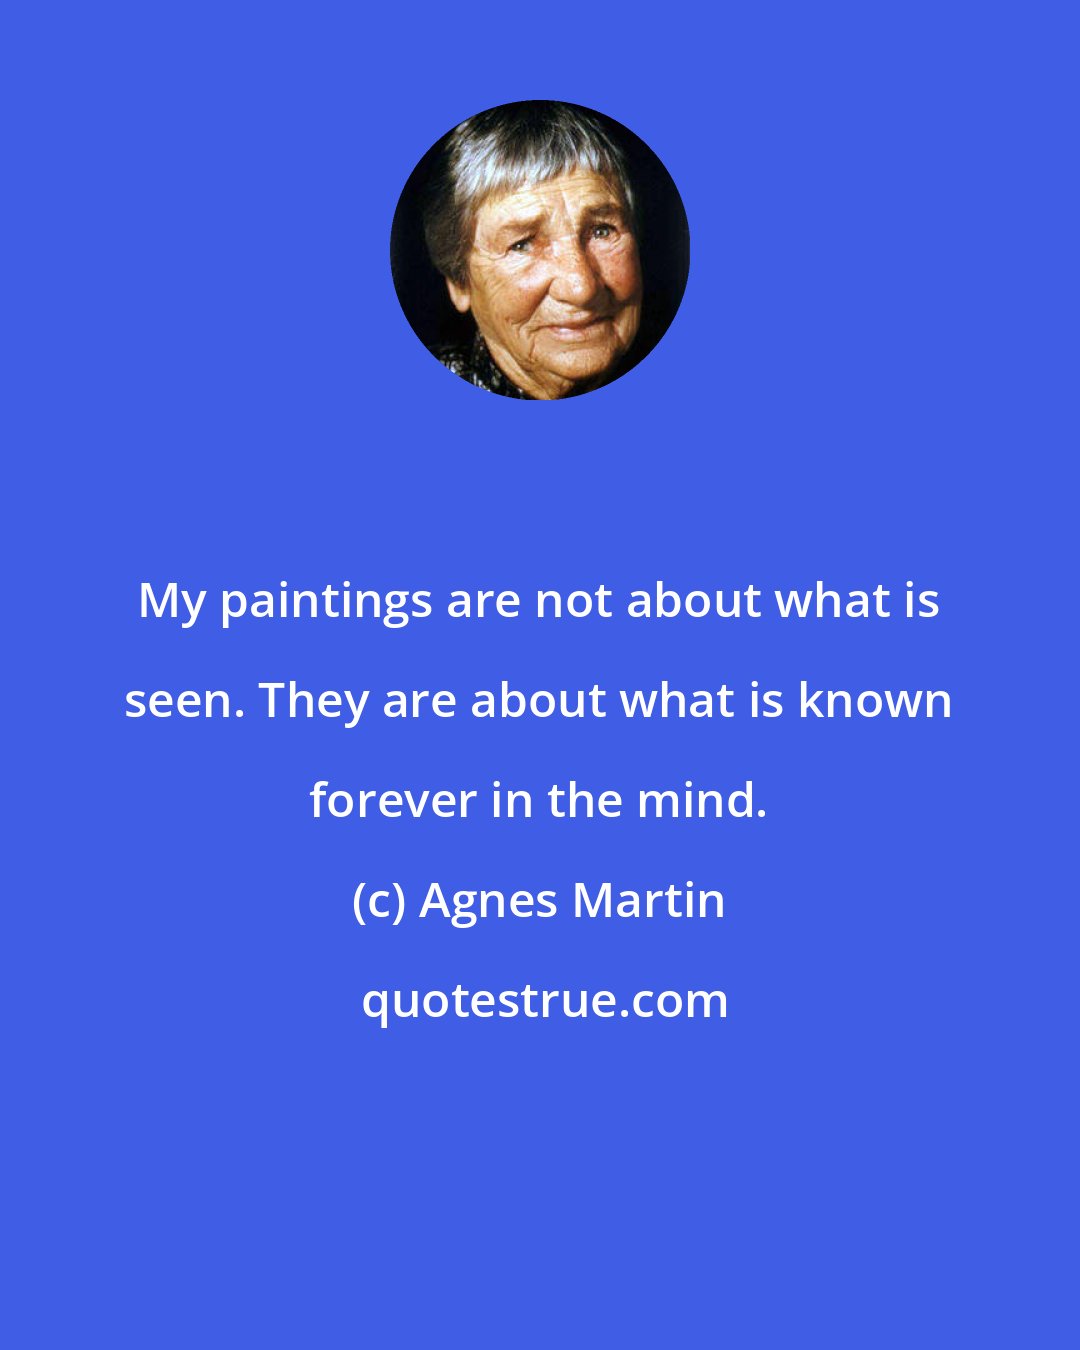 Agnes Martin: My paintings are not about what is seen. They are about what is known forever in the mind.